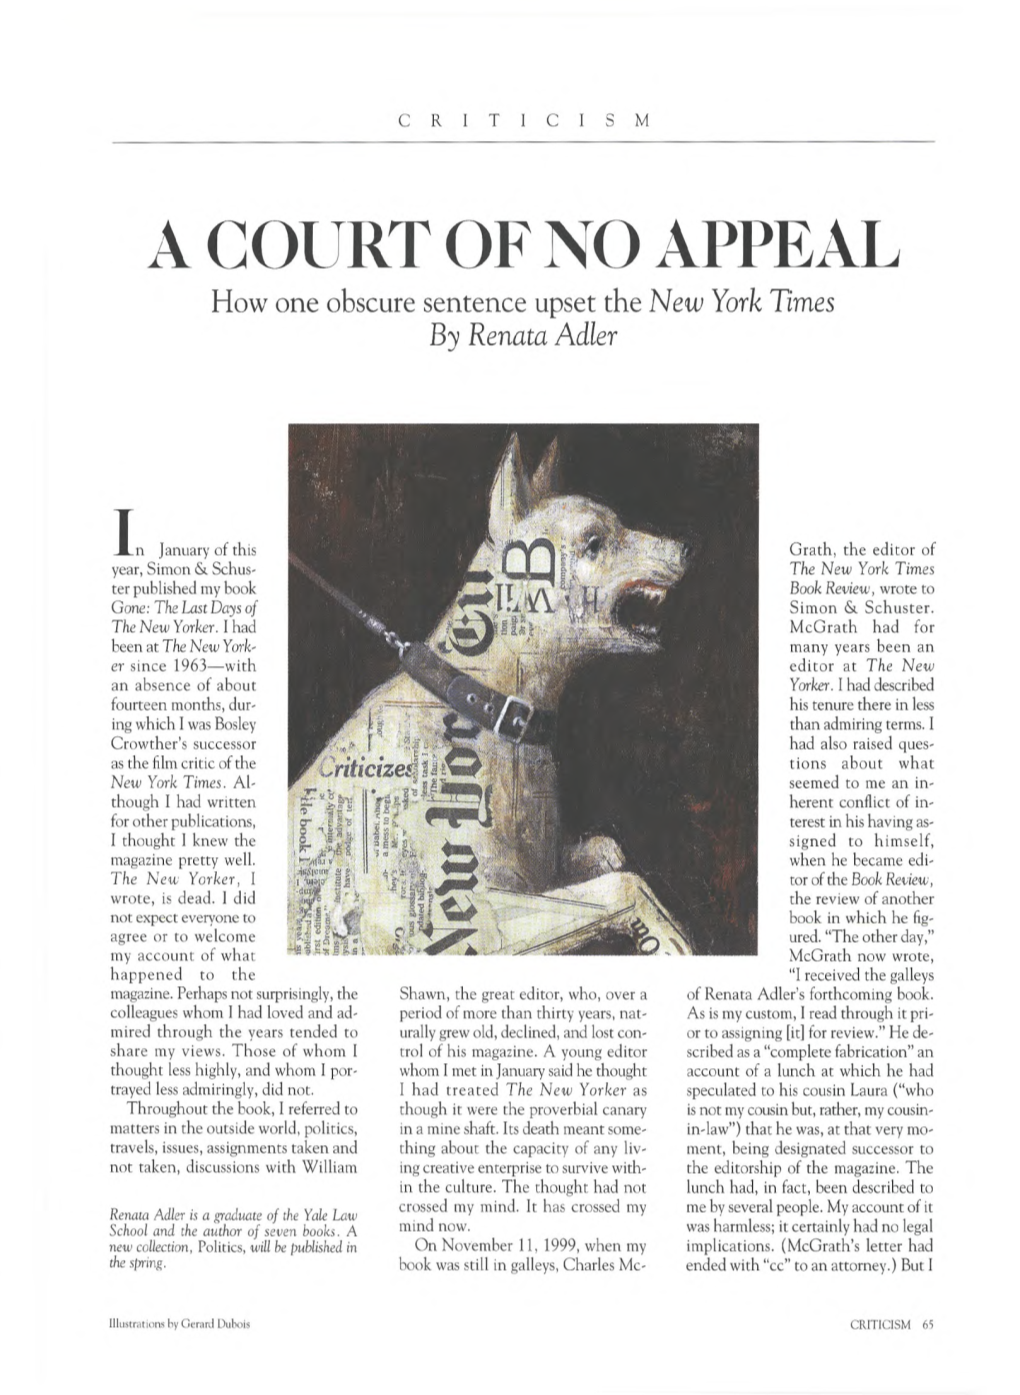 A COURT of NO APPEAL How One Obscure Sentence Upset the New York Times by Renata Adler